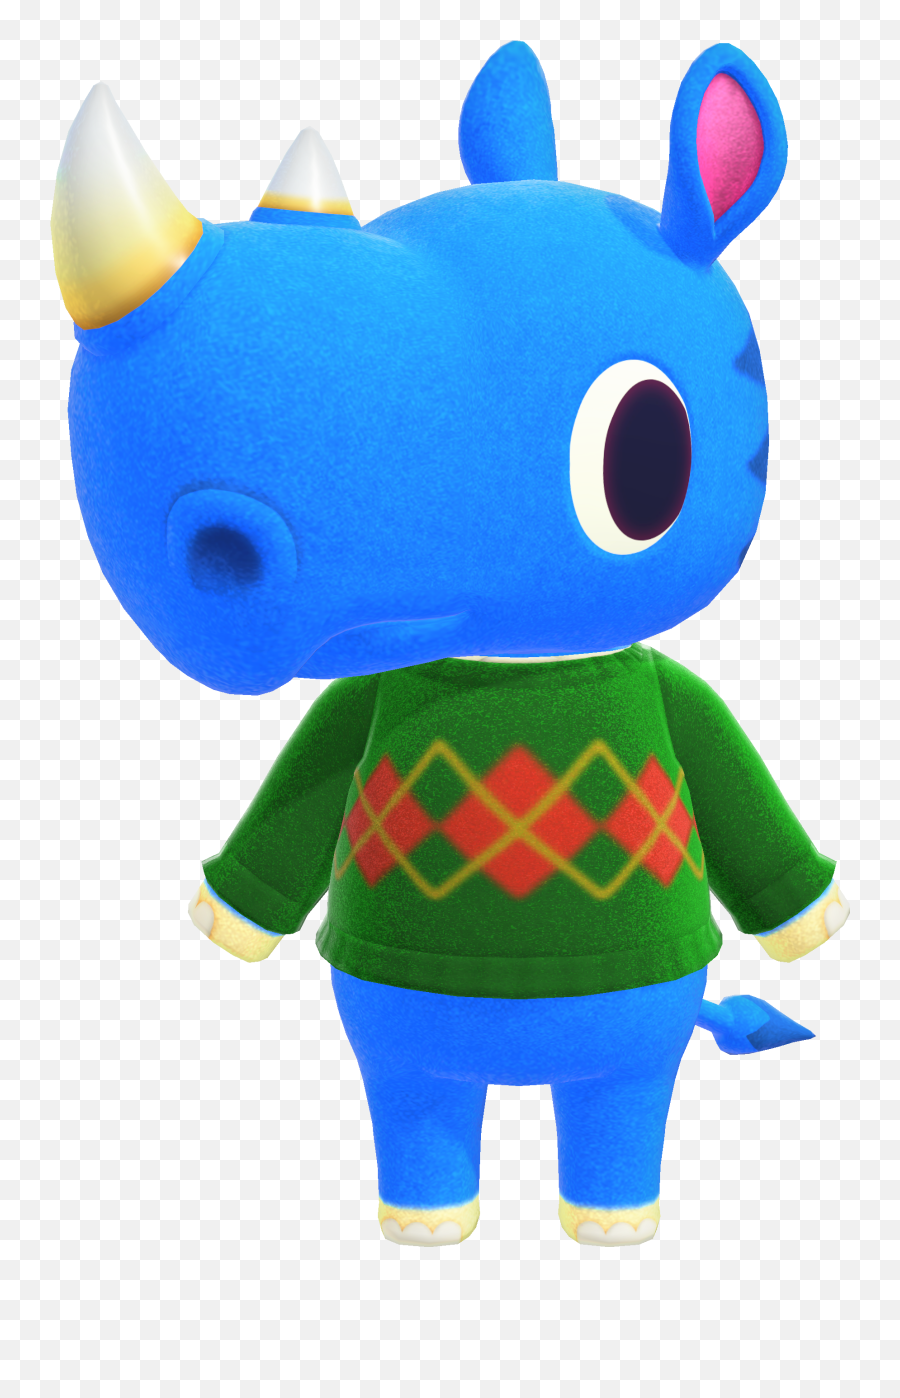 Hornsby - Hornsby Animal Crossing New Horizons Png,Animal Crossing Transparent